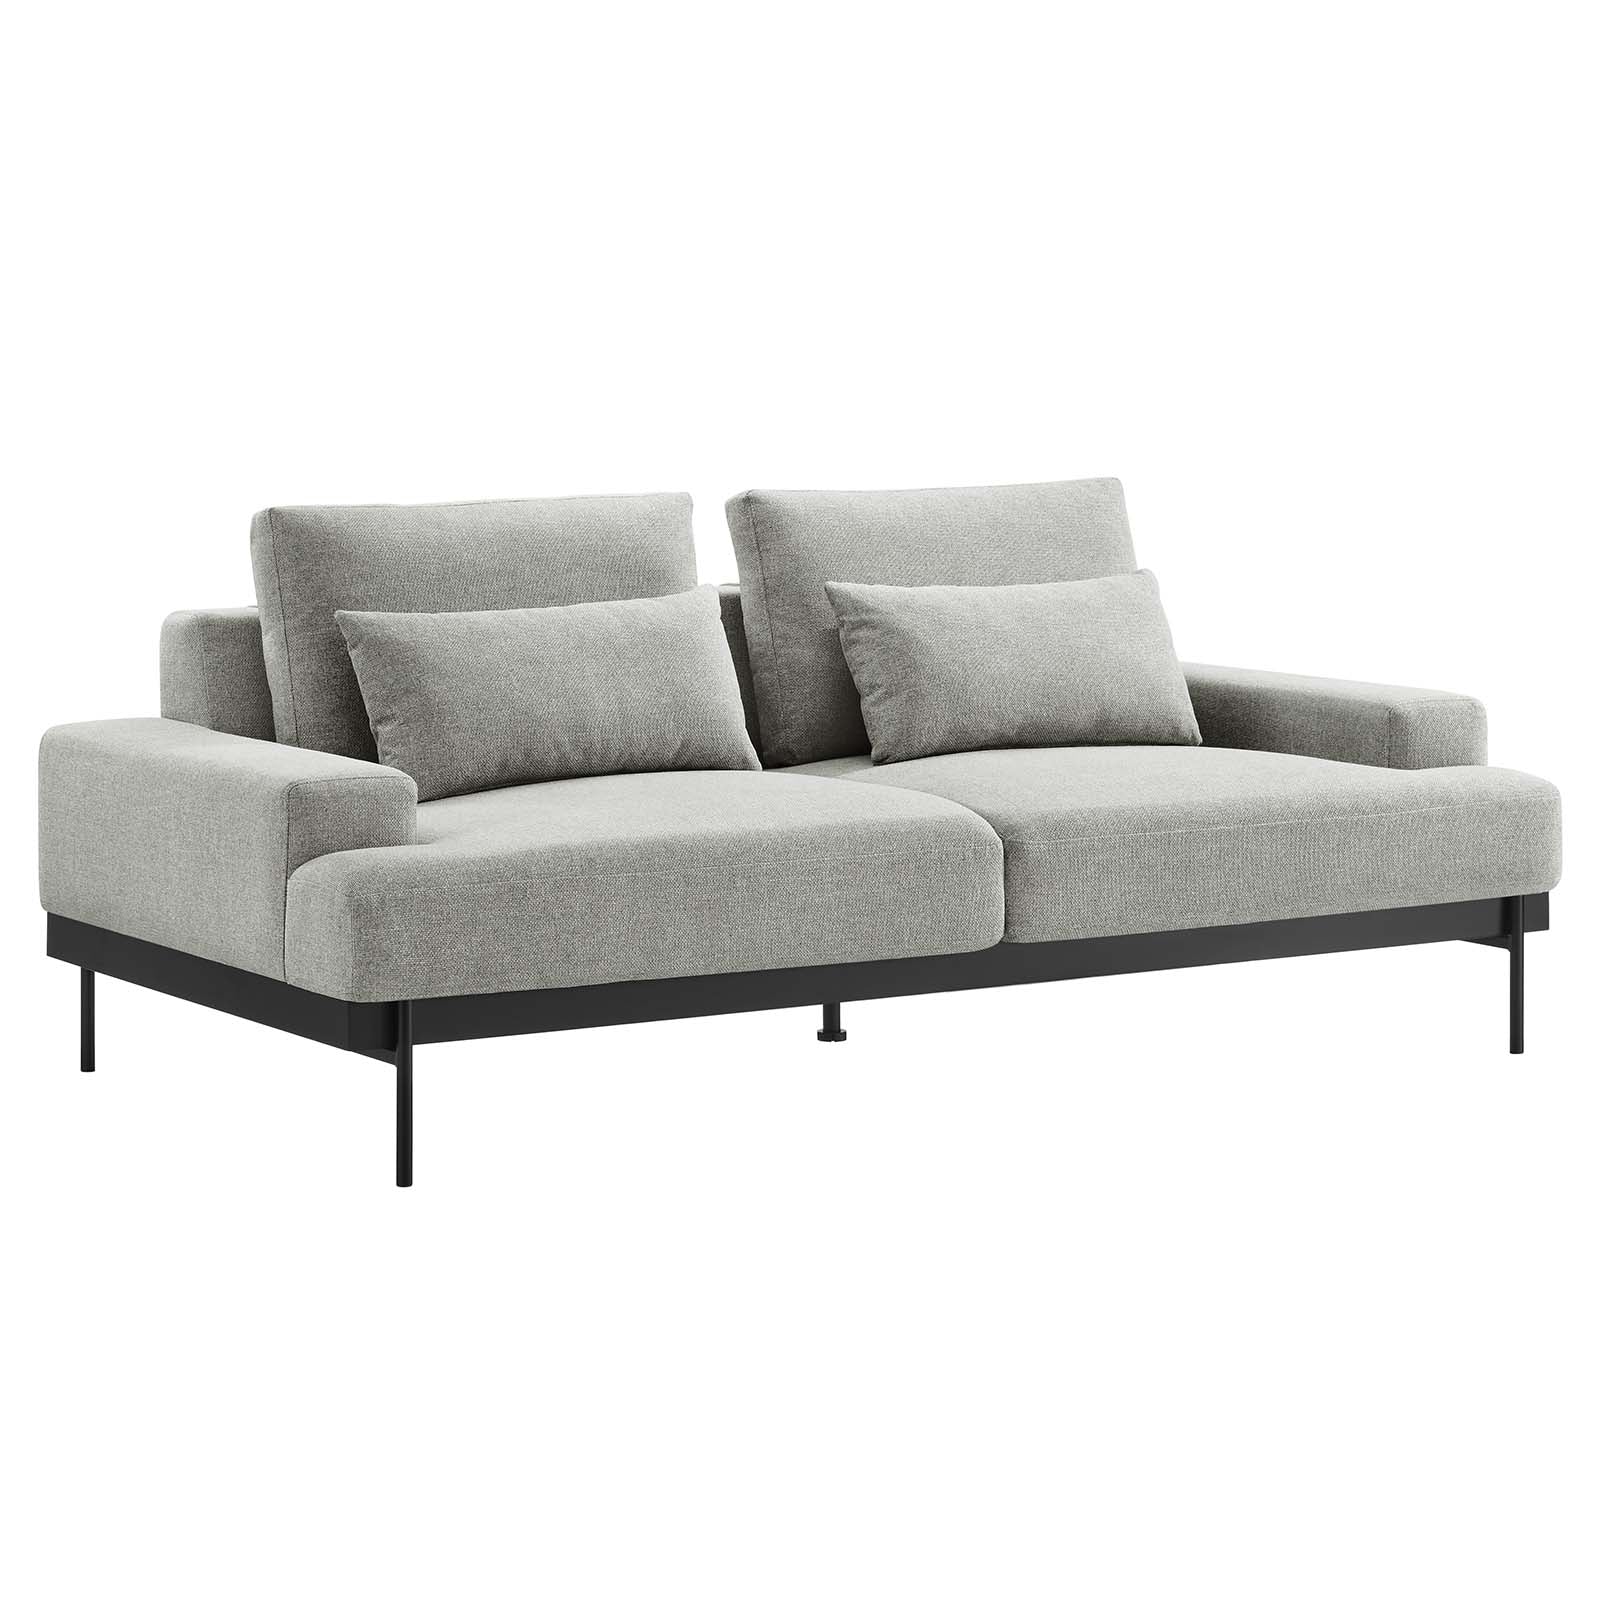 Acme Furniture Olwen 54590 Contemporary Power Reclining Sectional Sofa with  Cupholder Storage Console and USB Charging Ports, A1 Furniture & Mattress